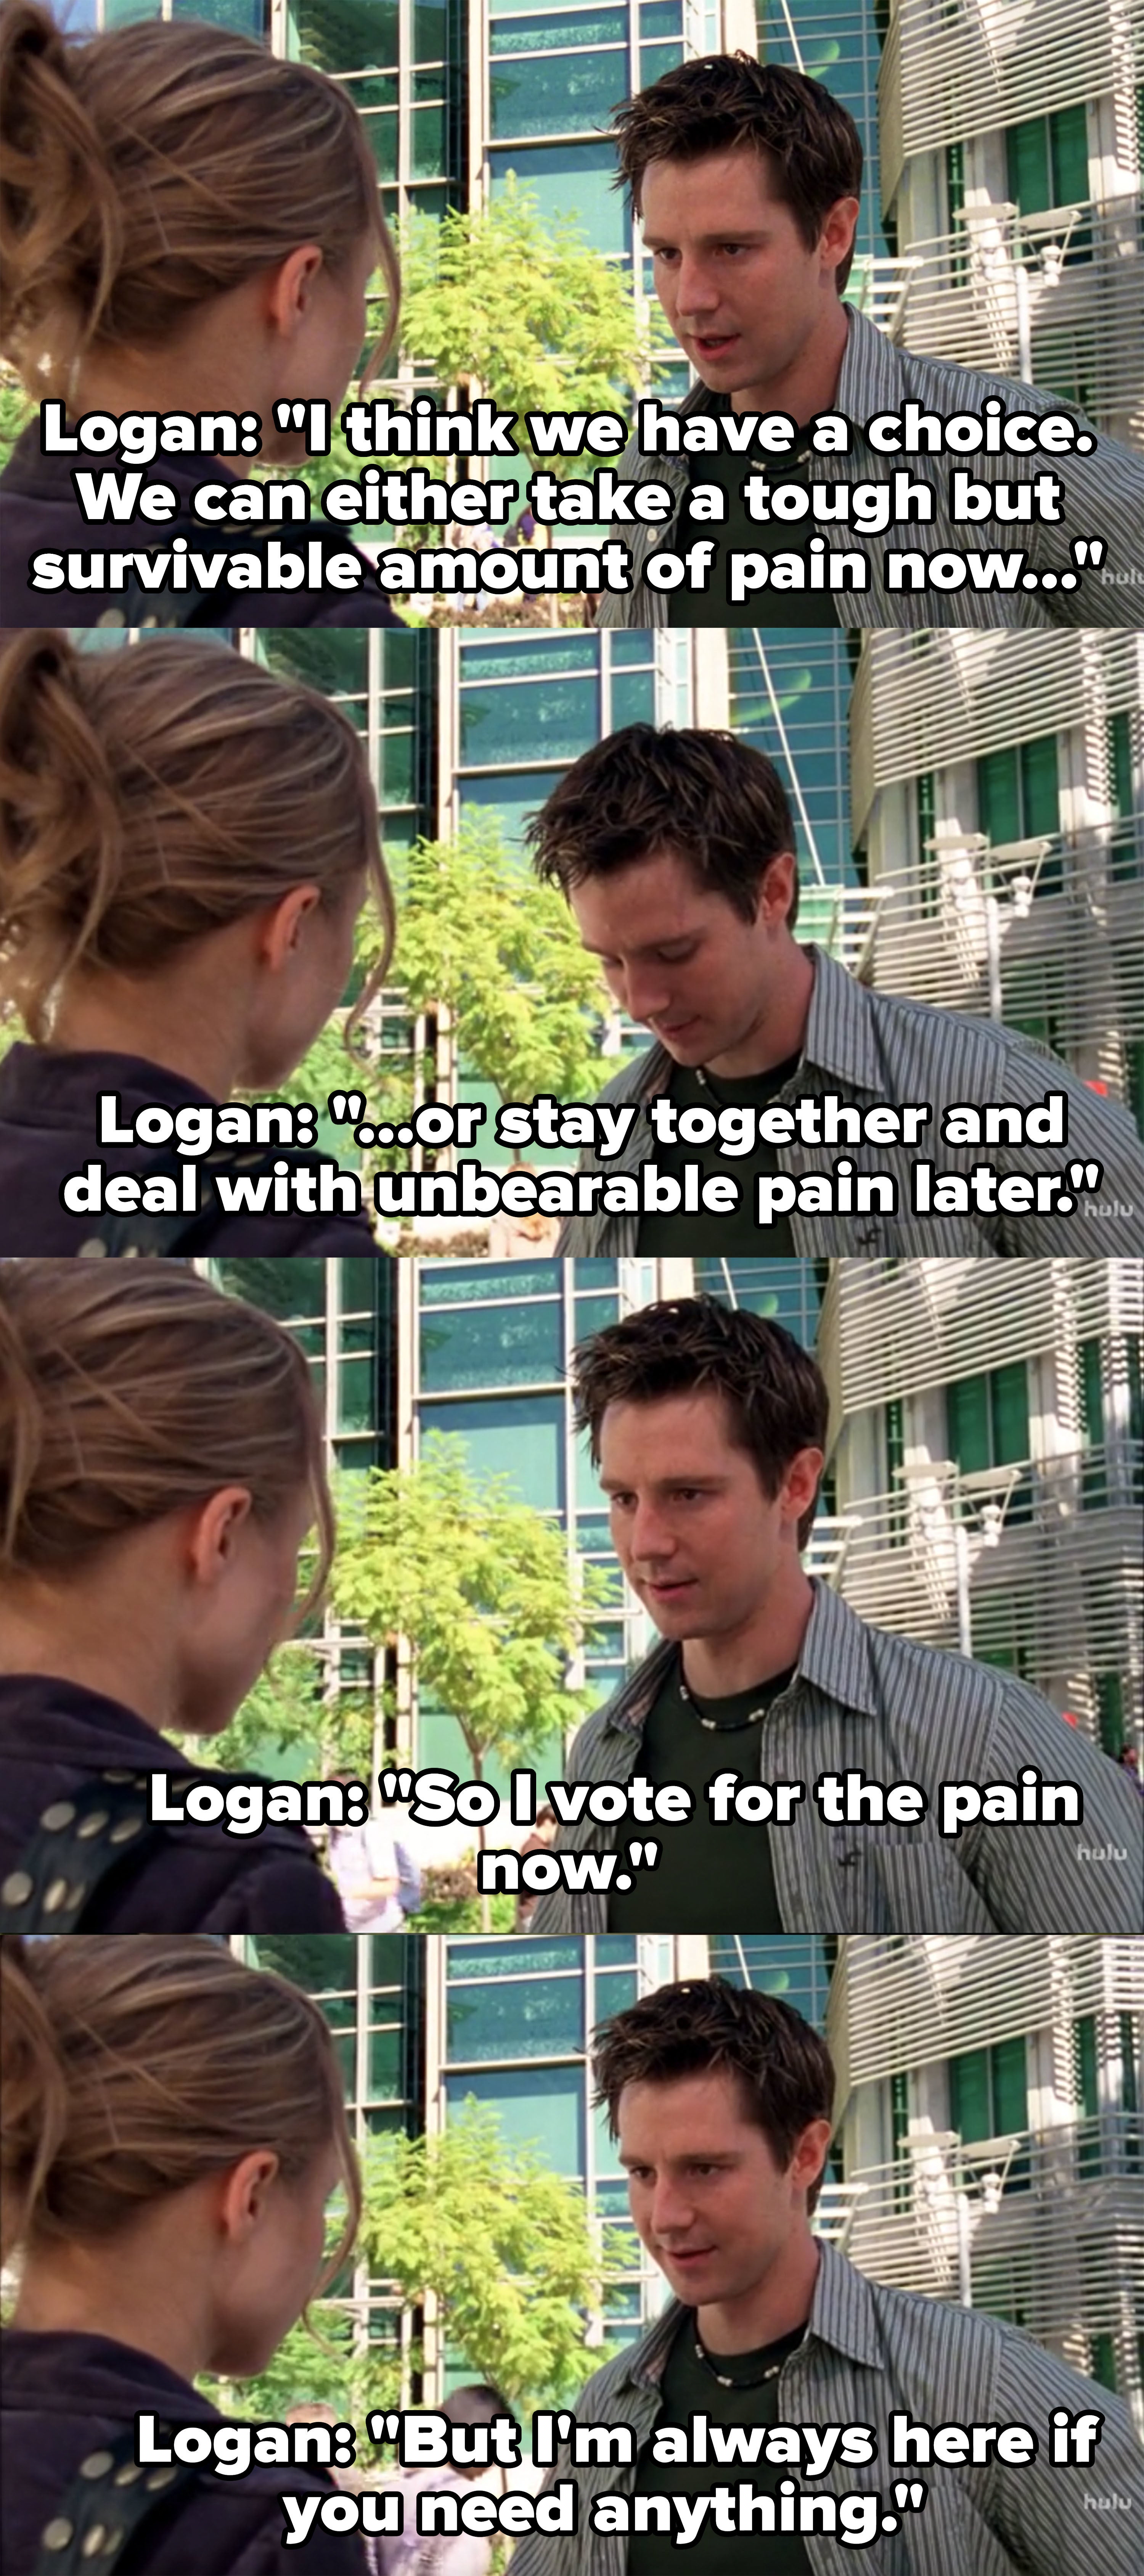 Logan says they can either take a &quot;tough, but survivable amount of pain now&quot; or stay together and deal with unbearable pain later&quot; so he votes for the pain now